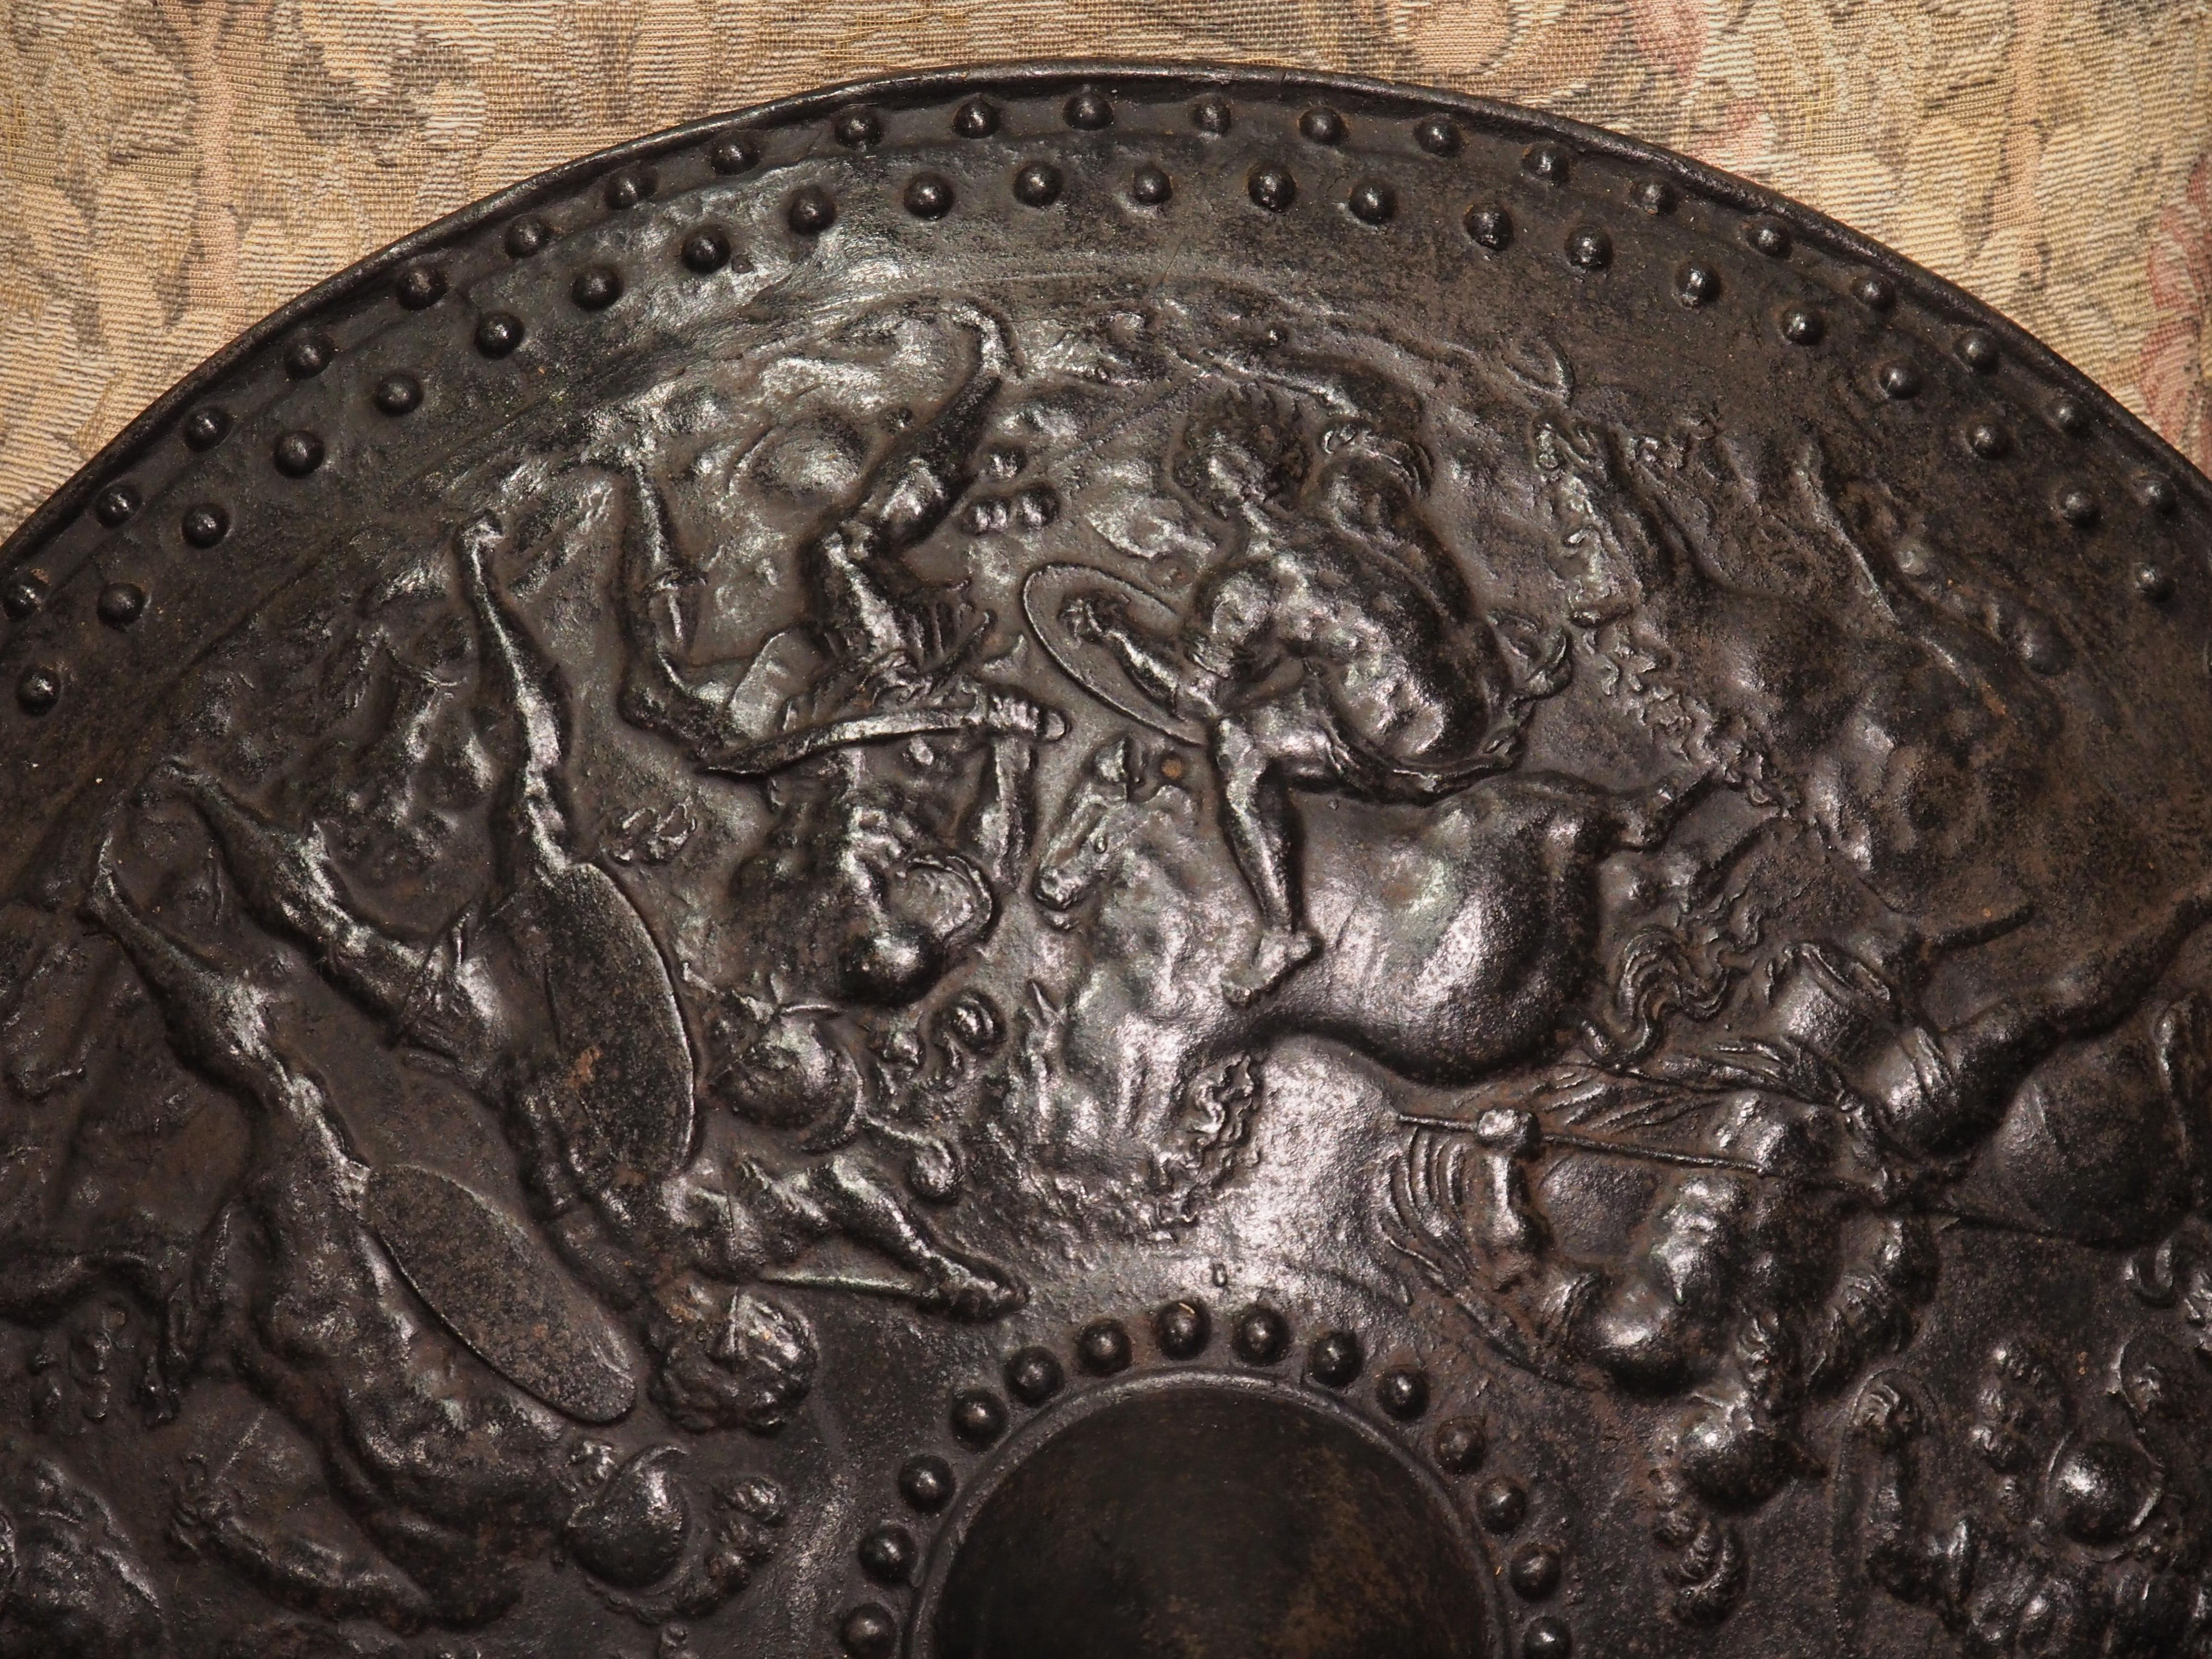 A fascinating iron shield that was cast in France, circa 1890, this round armorial piece features a central conical umbo (sometimes called a “shield boss”) surrounded by a 360-degree scene depicting a military engagement. The brutal skirmish depicts